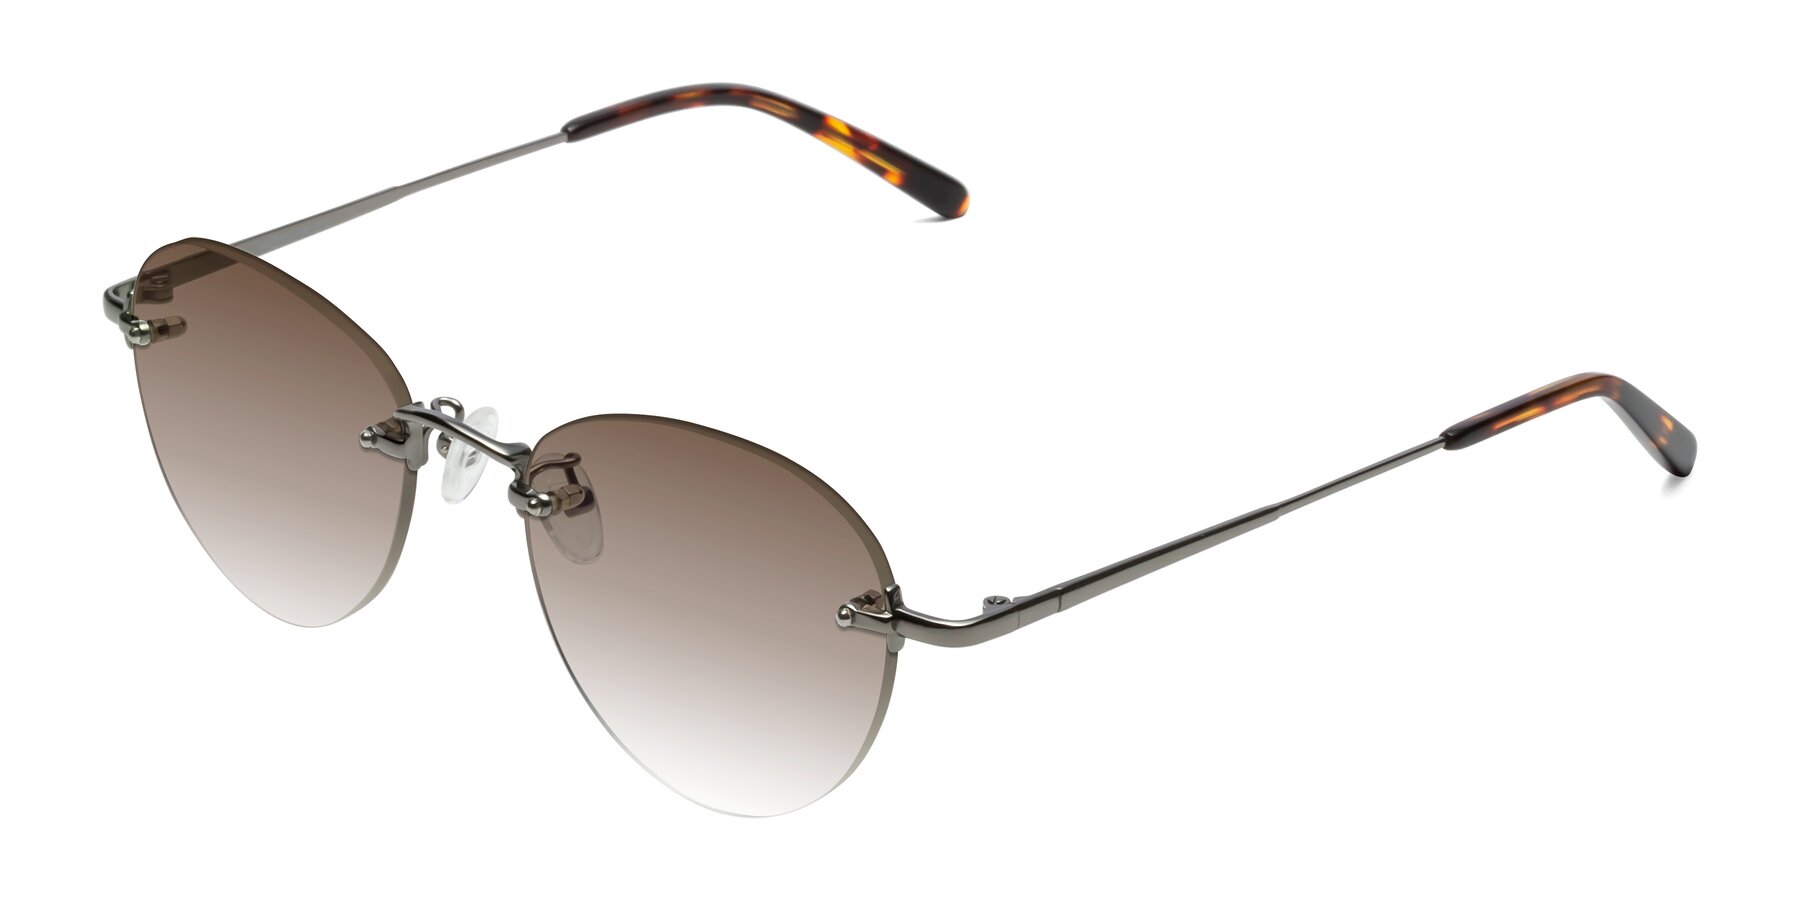 Amazon.com: Ray-Ban Aviator RB3025 001/51 Arista/Crystal Brown Gradient  58mm Sunglasses : Clothing, Shoes & Jewelry